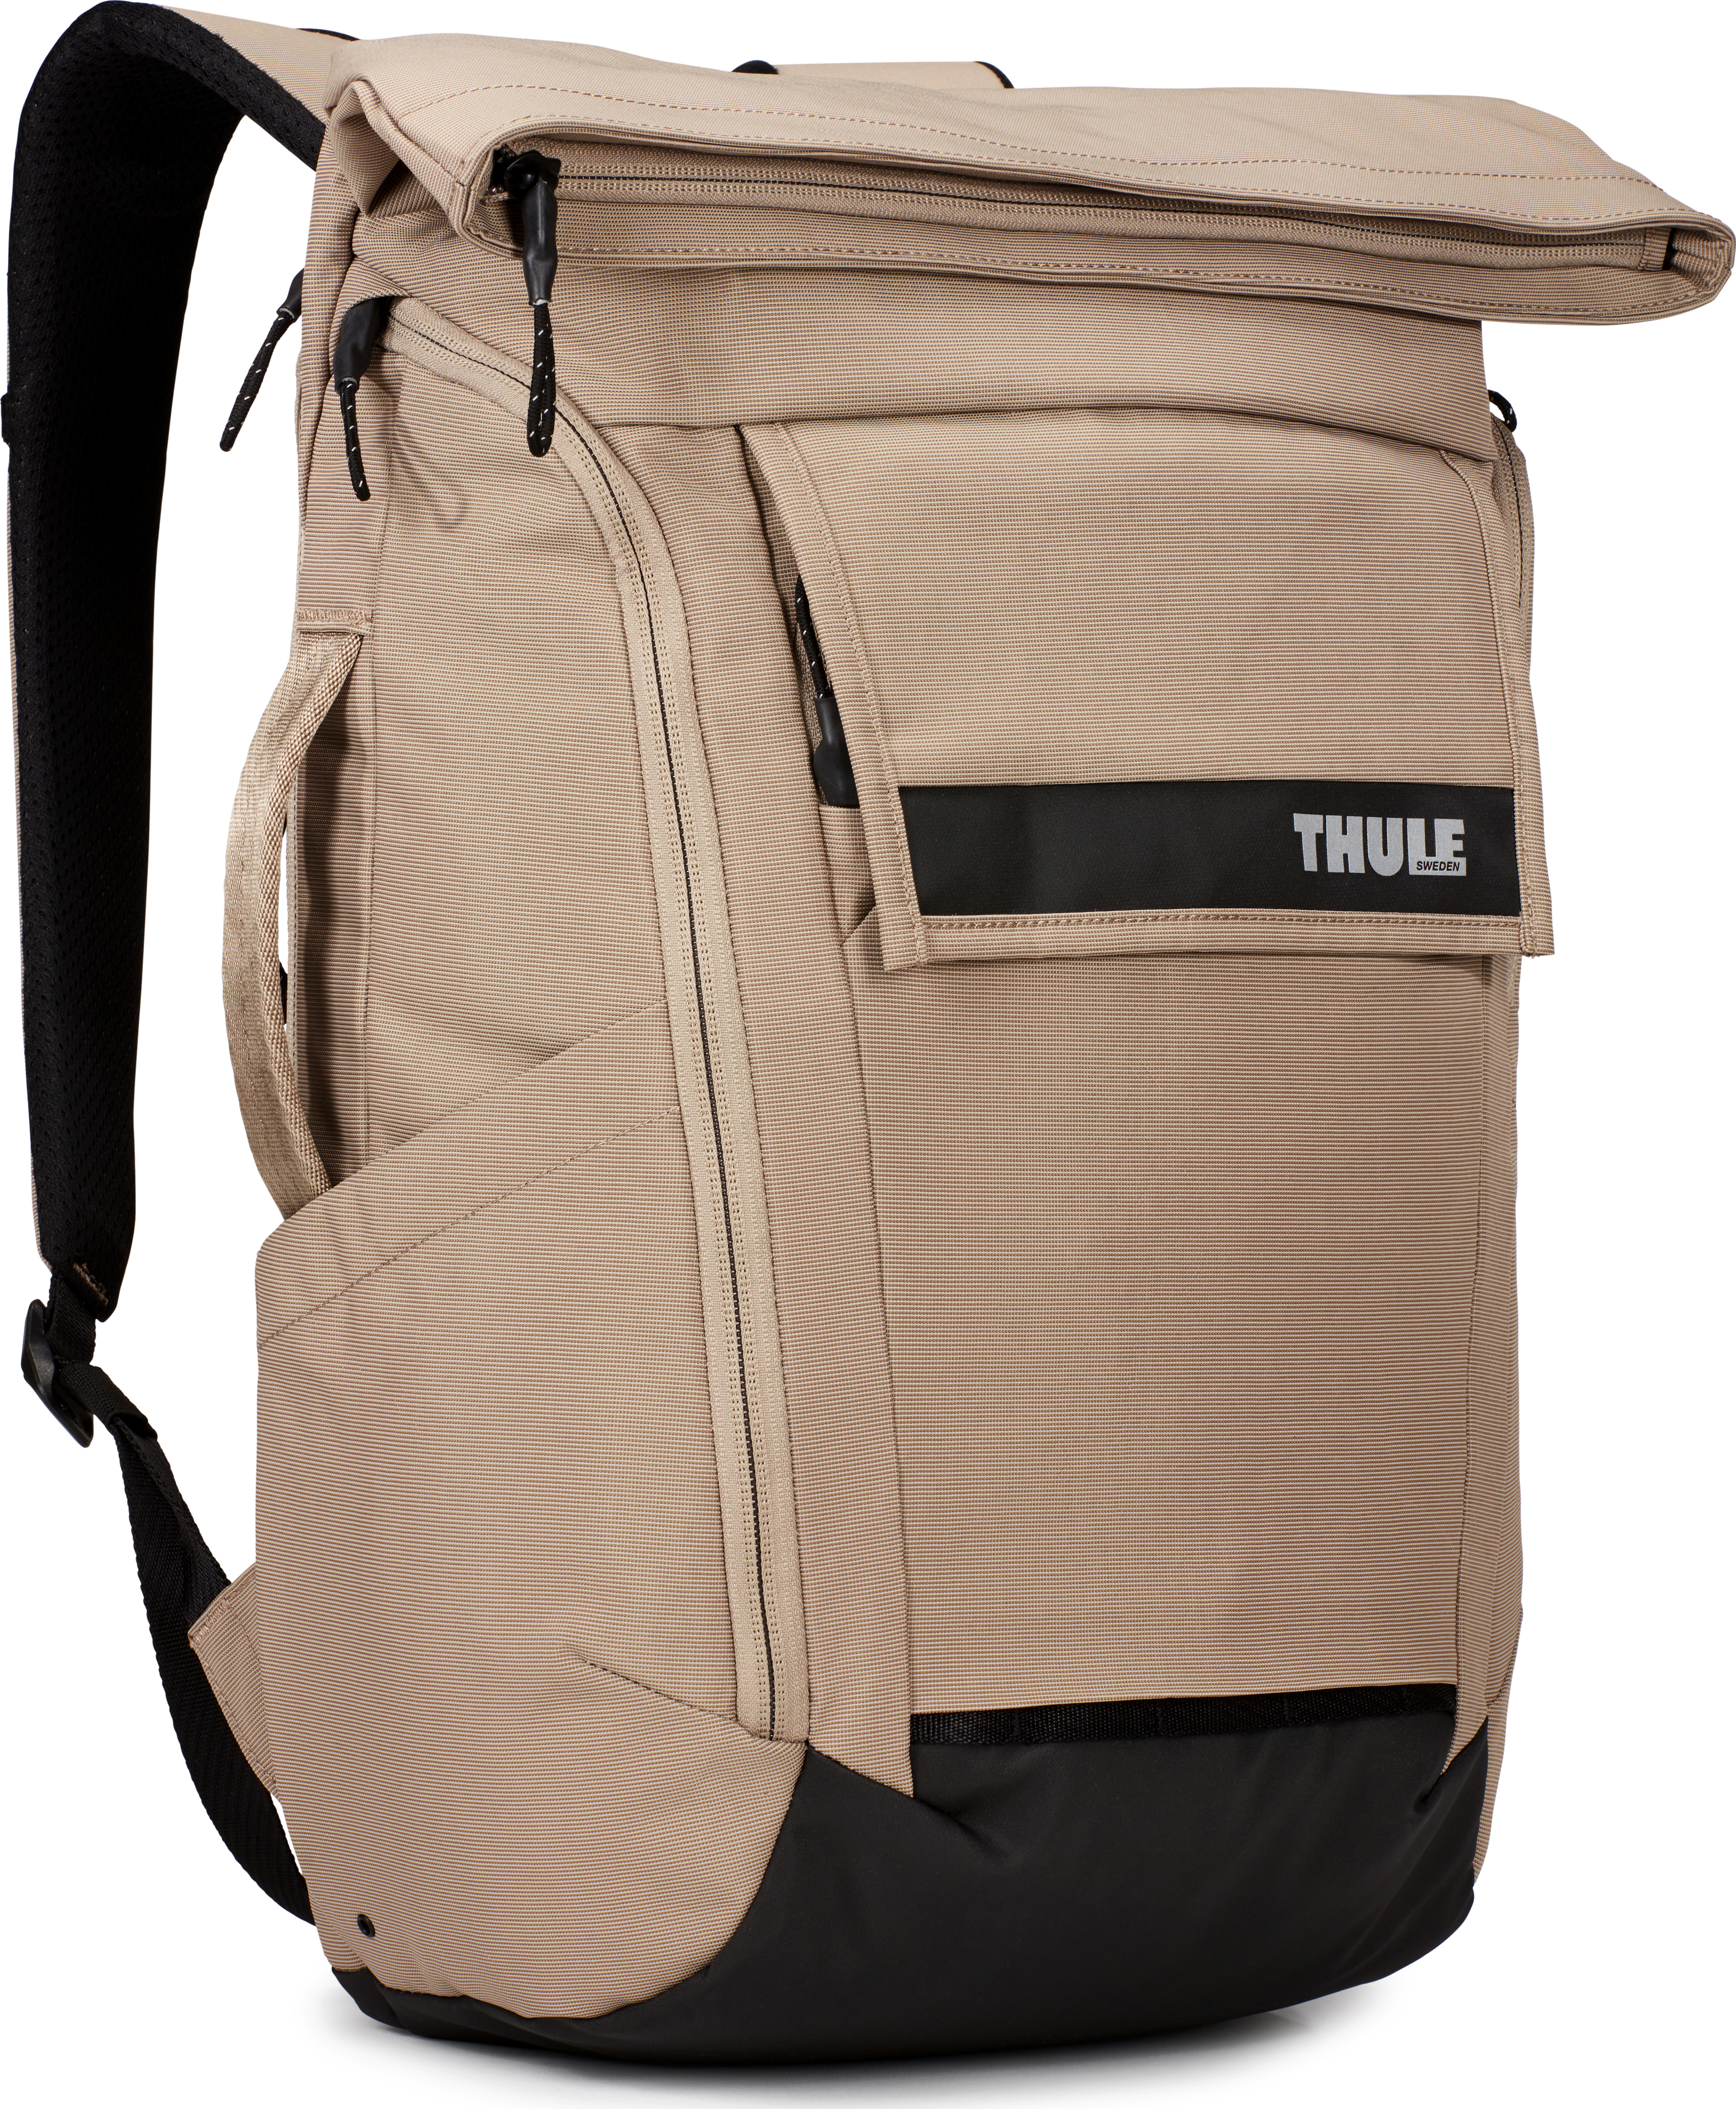 Thule Paramount Backpack 24L Timberwolf Beige